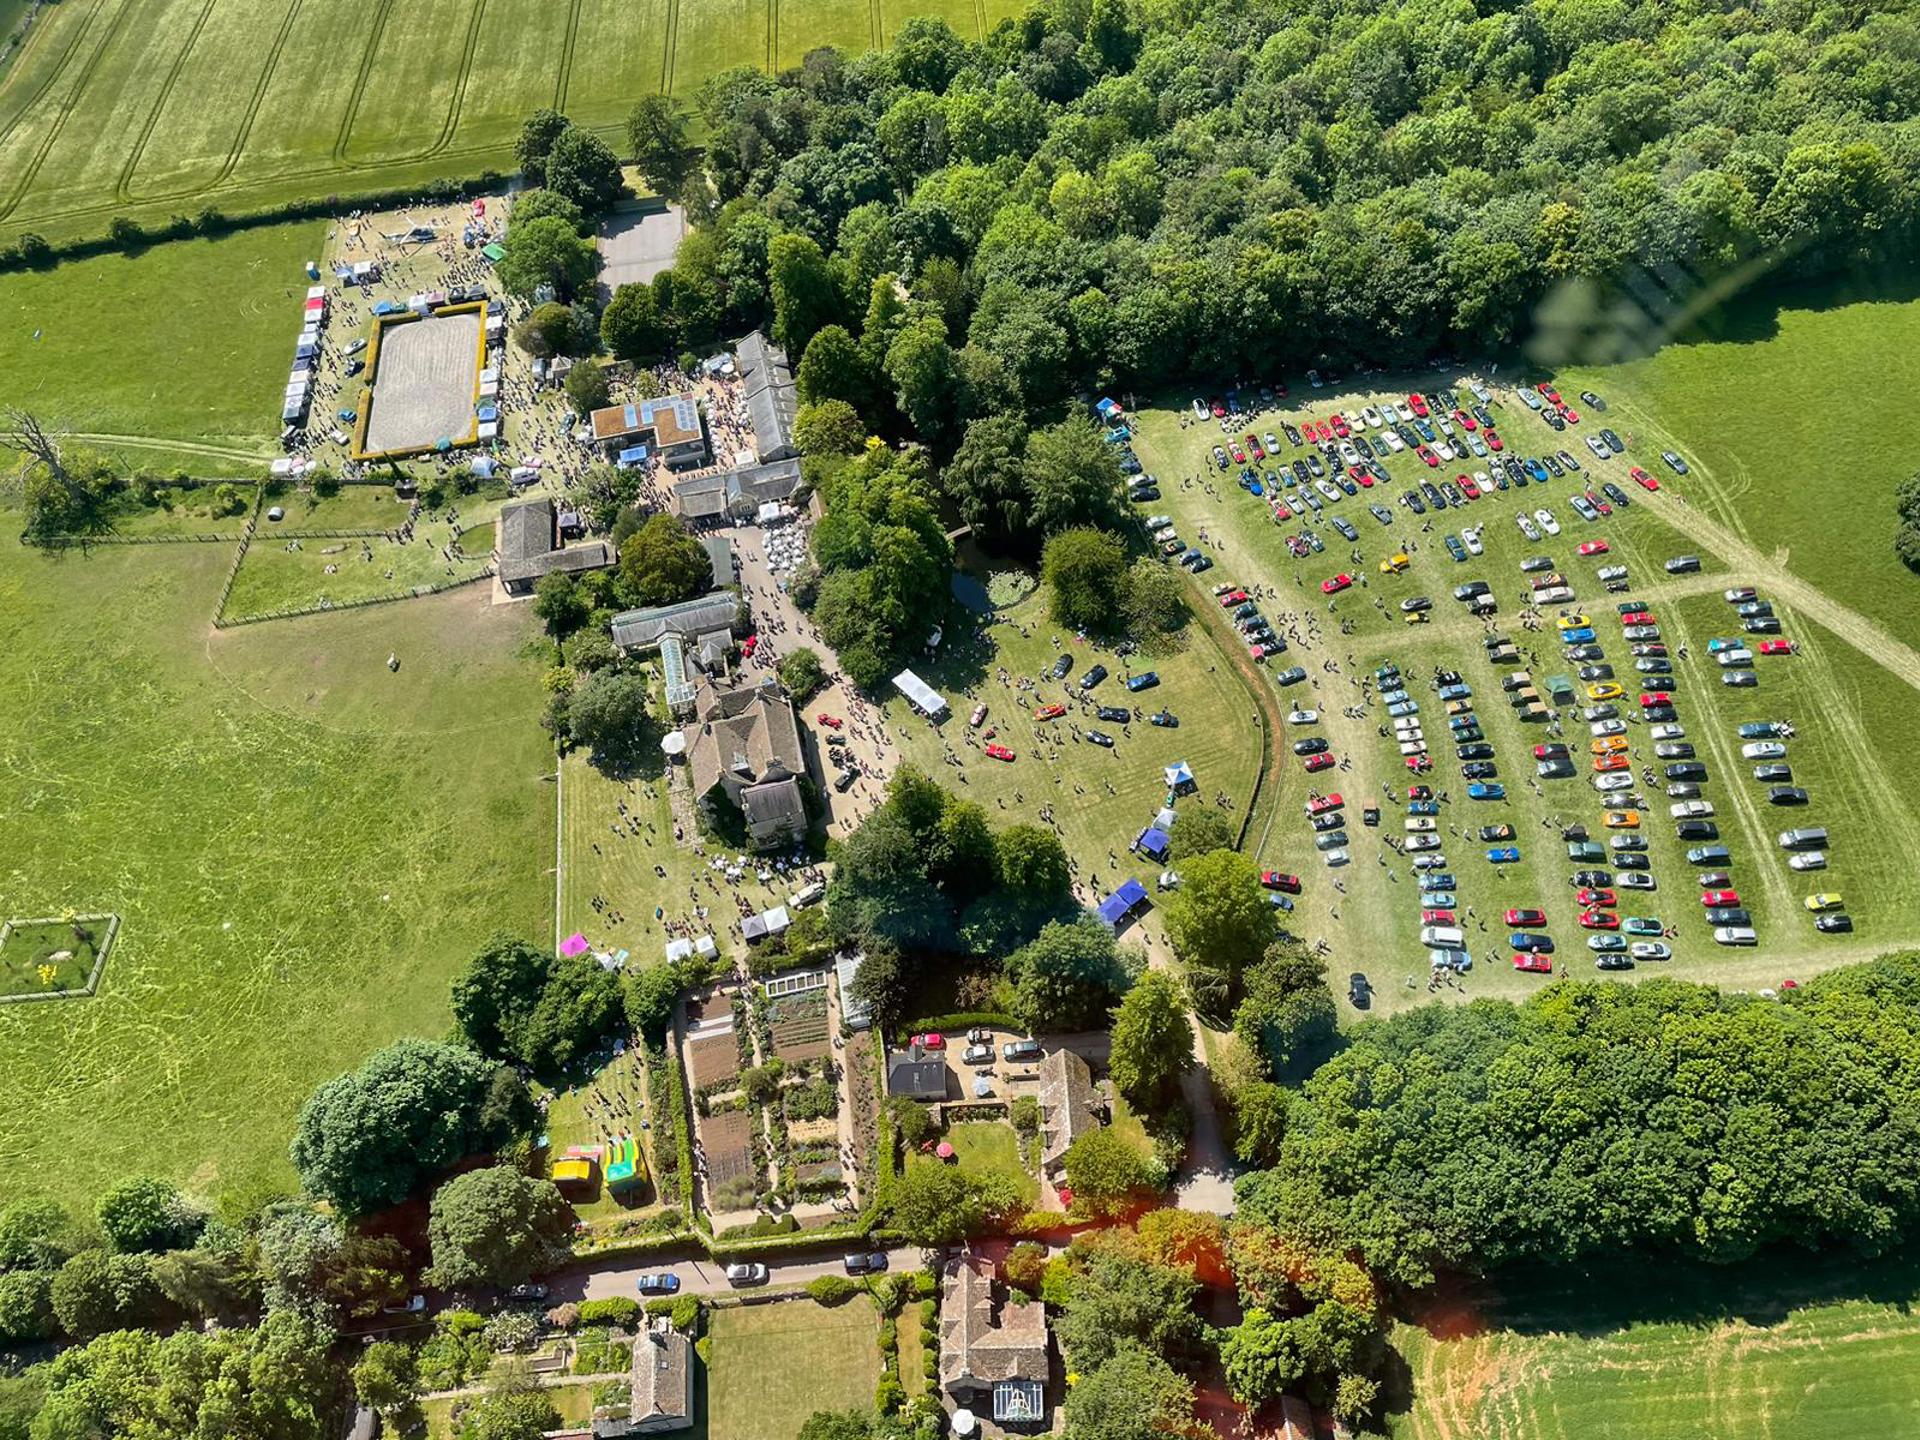 An aerial view of Middlewick House, taken from Wiltshire Air Ambulance's helicopter